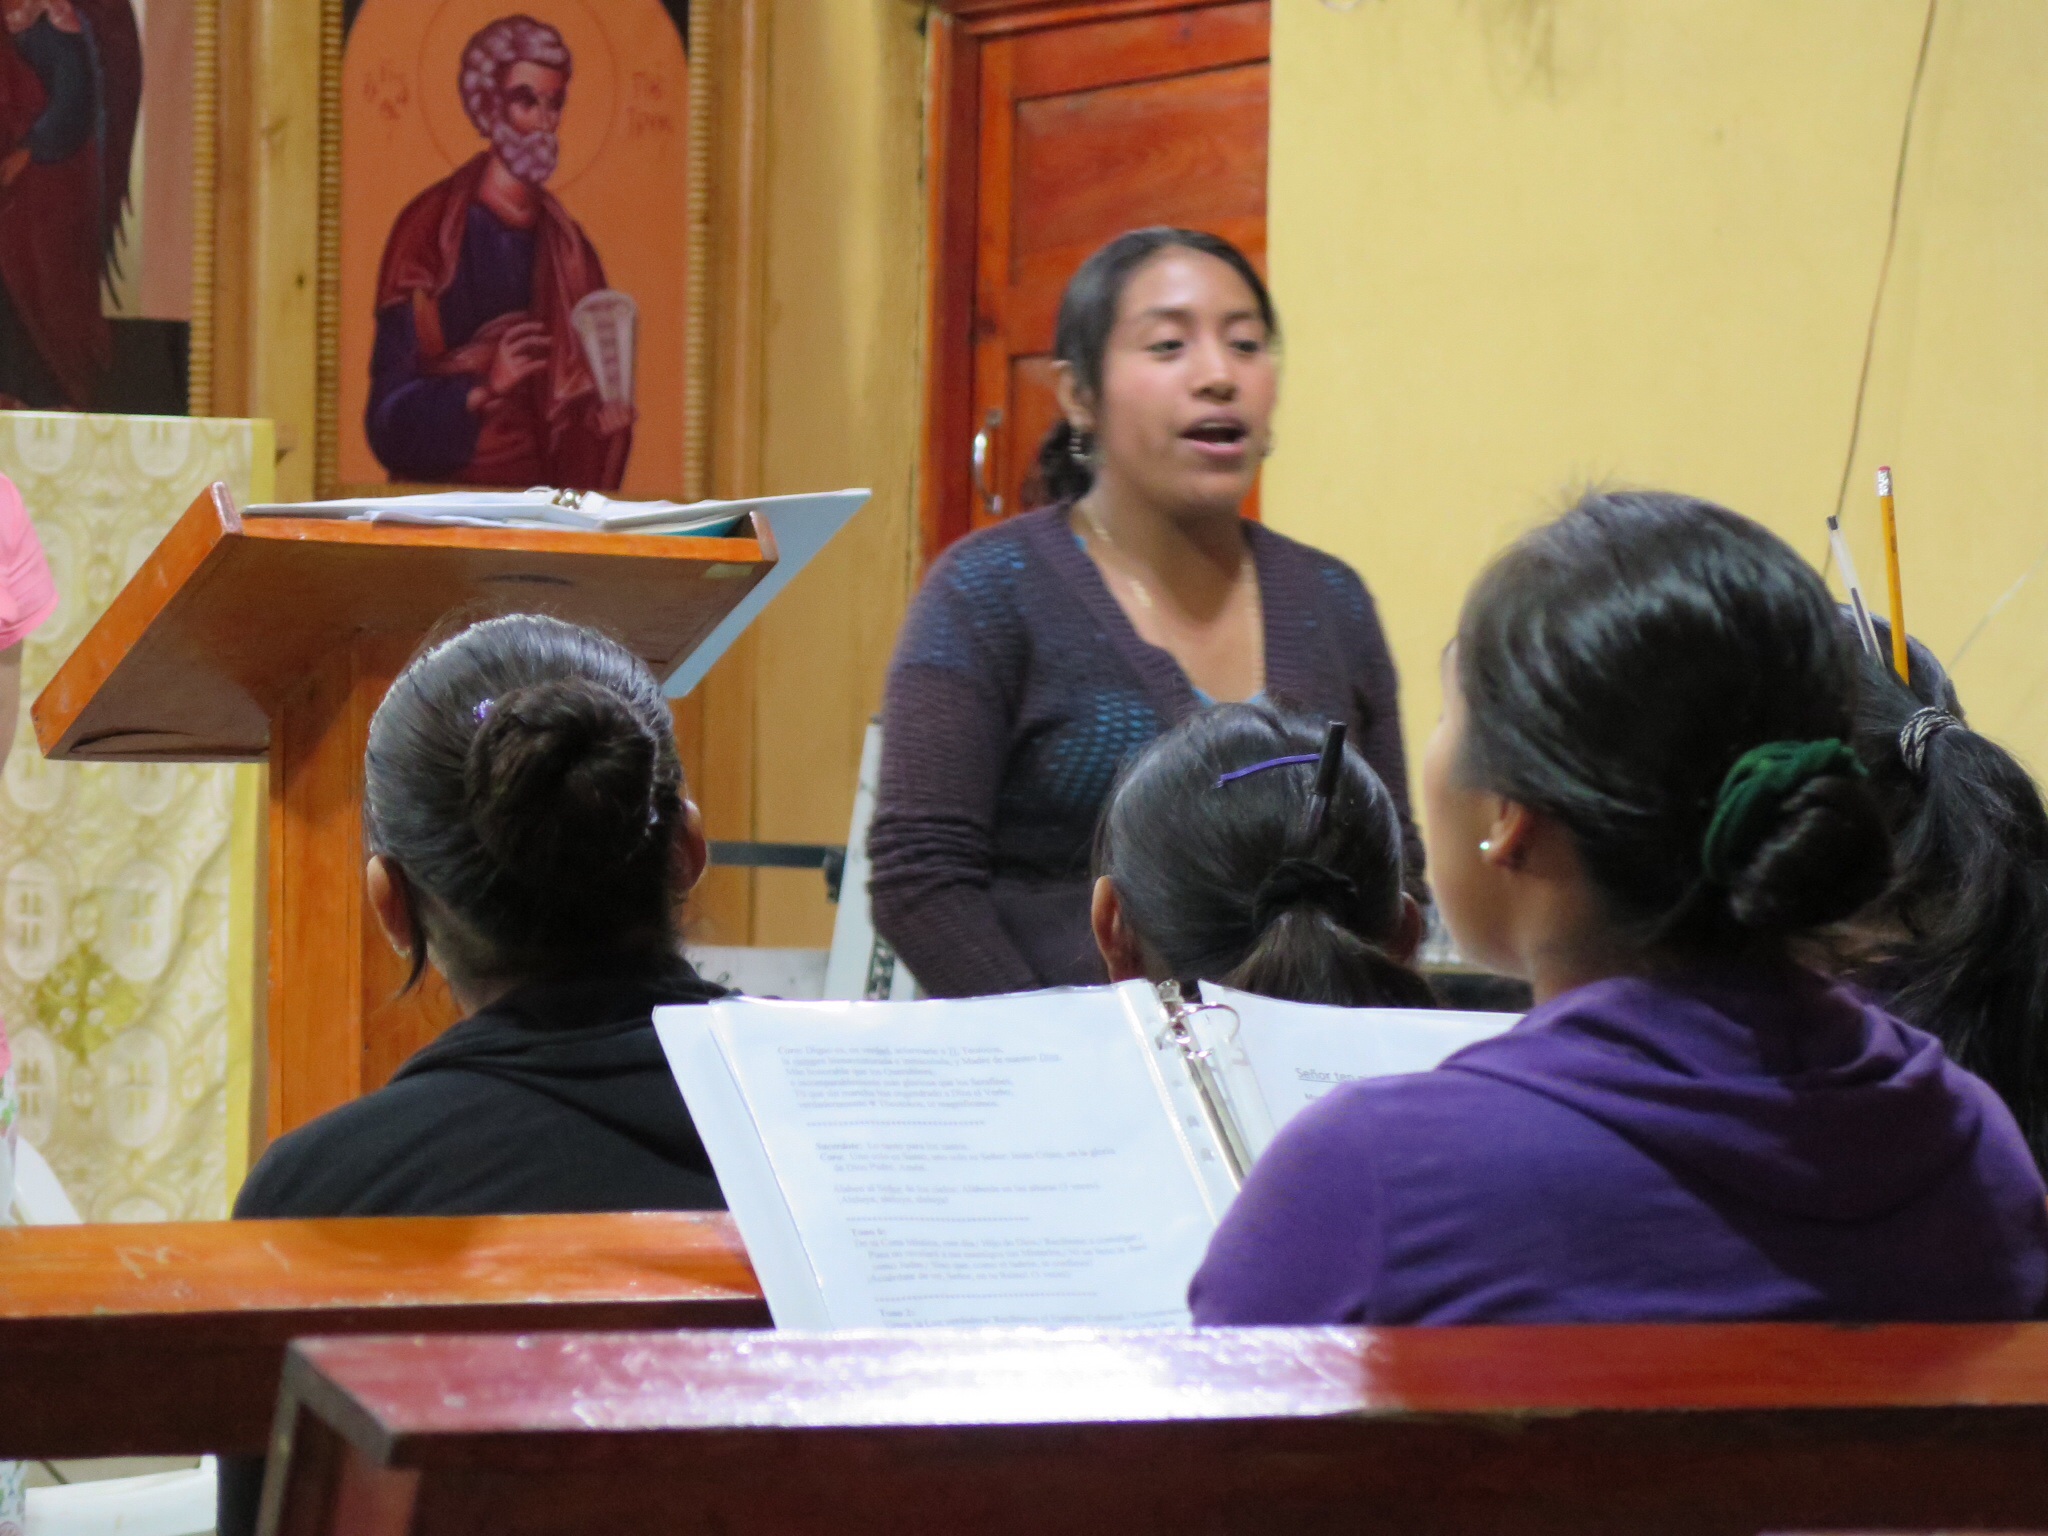 ORTHODOXY IN THE GUATEMALAN HIGHLANDS: A LIGHT SHINES BRIGHTLY